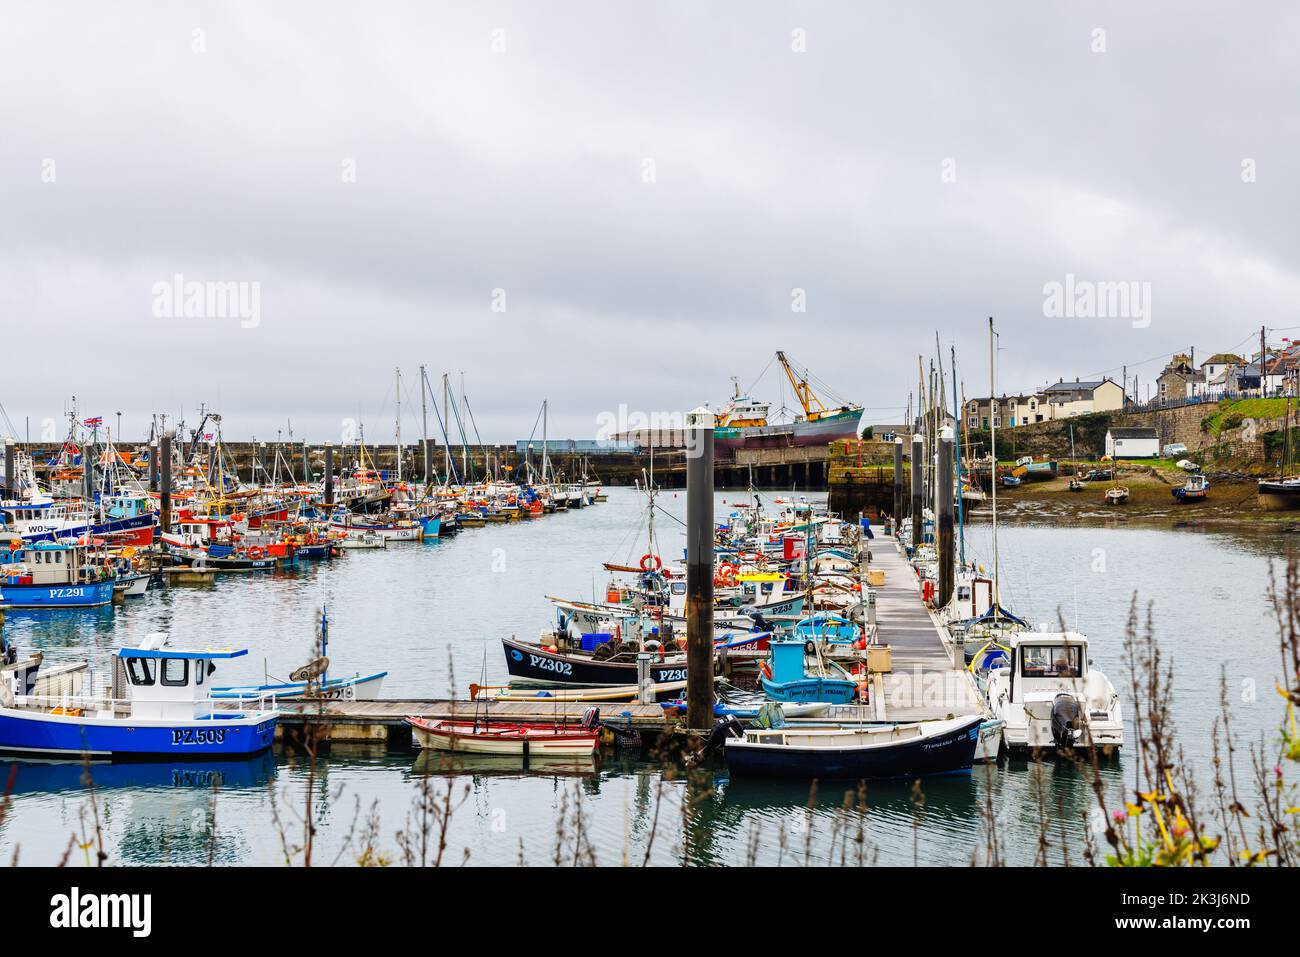 Fishing boats moored in the harbour at Newlyn, a small commercial fishing village in the West Country, on the south coast of west Cornwall, England Stock Photo